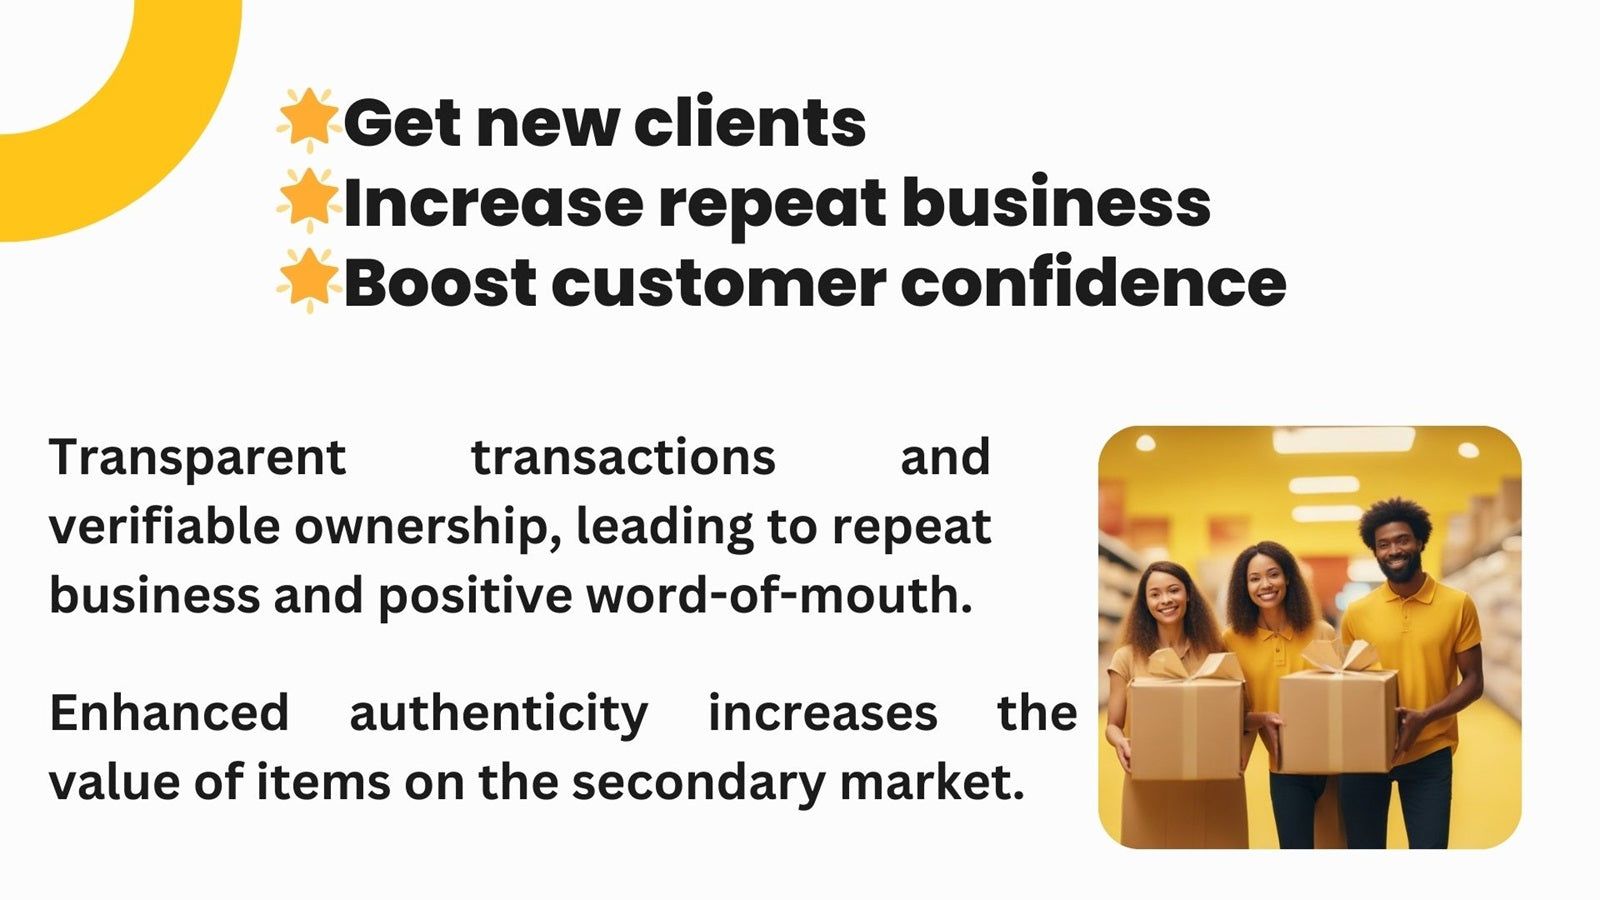 Get new clients, increase repeat business, boost confidence